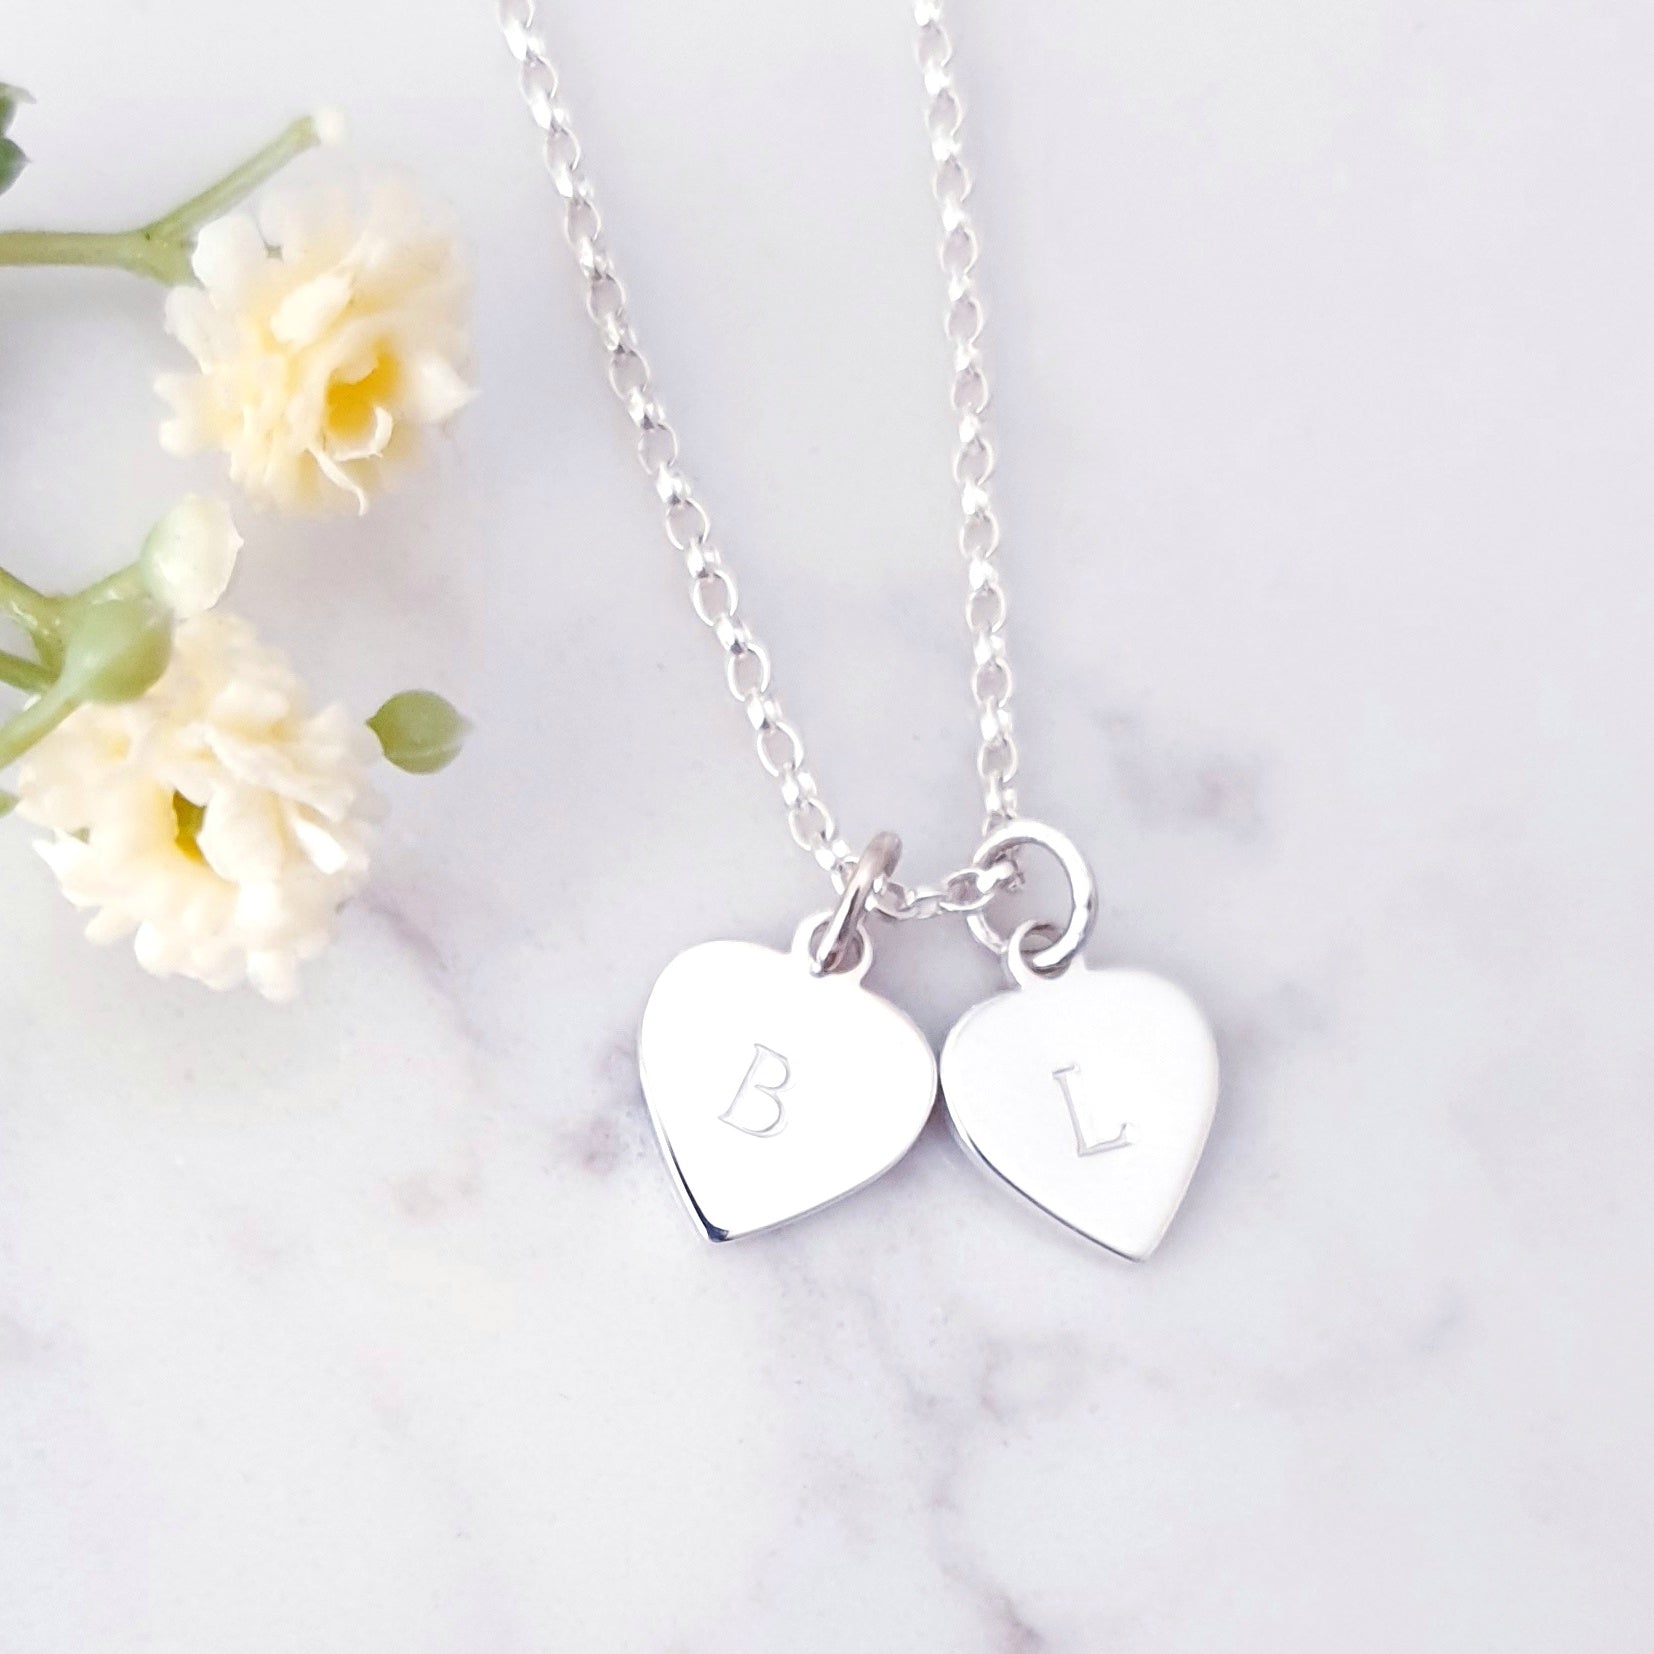 Personalised Disc Charm Initial Necklace | Lisa Angel